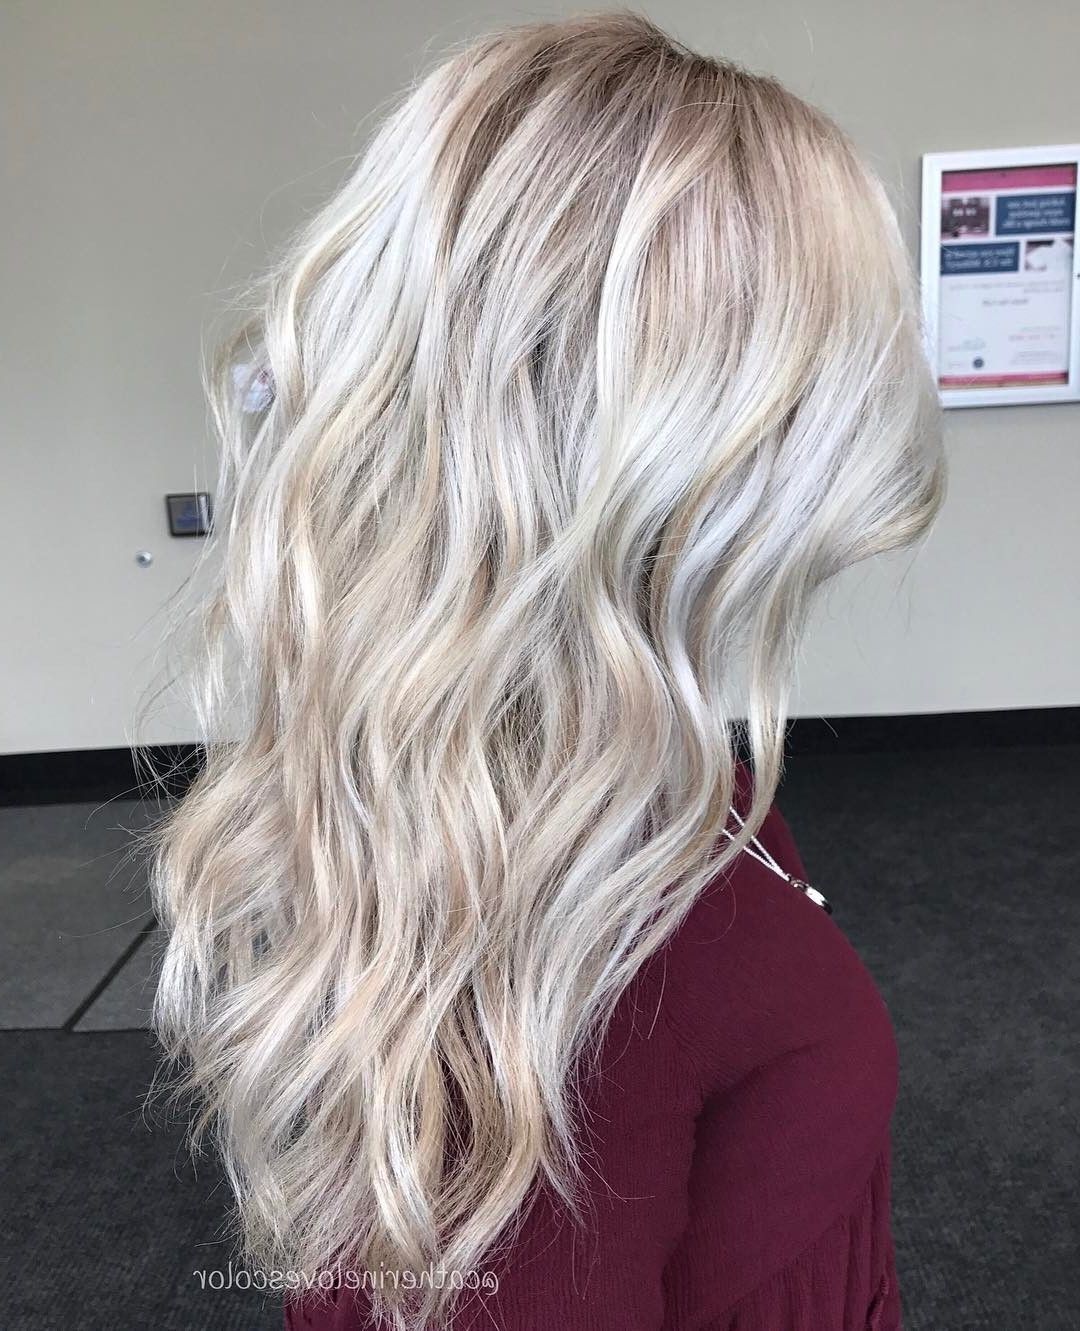 Trendy Long Platinum Locks Blonde Hairstyles For 20 Adorable Ash Blonde Hairstyles To Try: Hair Color Ideas  (View 5 of 20)